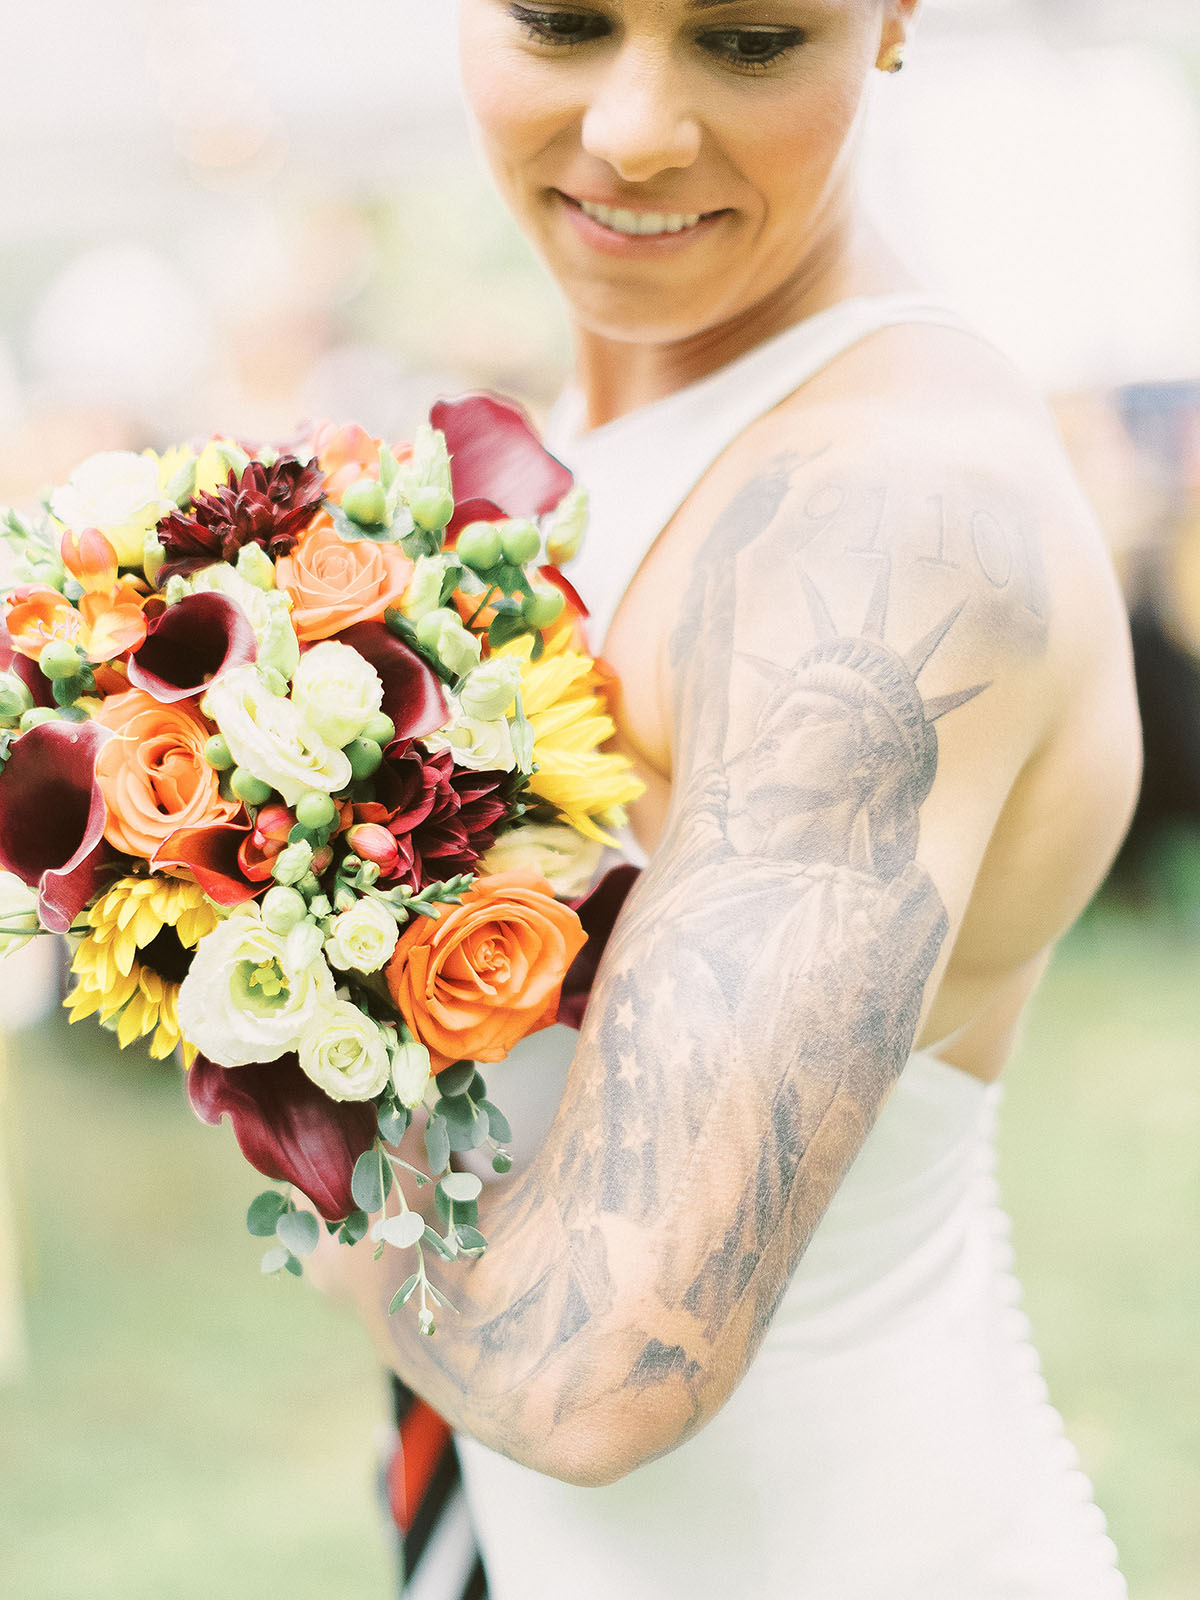 Rustic orange and yellow autumn wedding in Norfolk, MA LGBTQ+ weddings mrs. and mrs. two brides lesbian wedding fall autumn cozy New England state of liberty tattoo